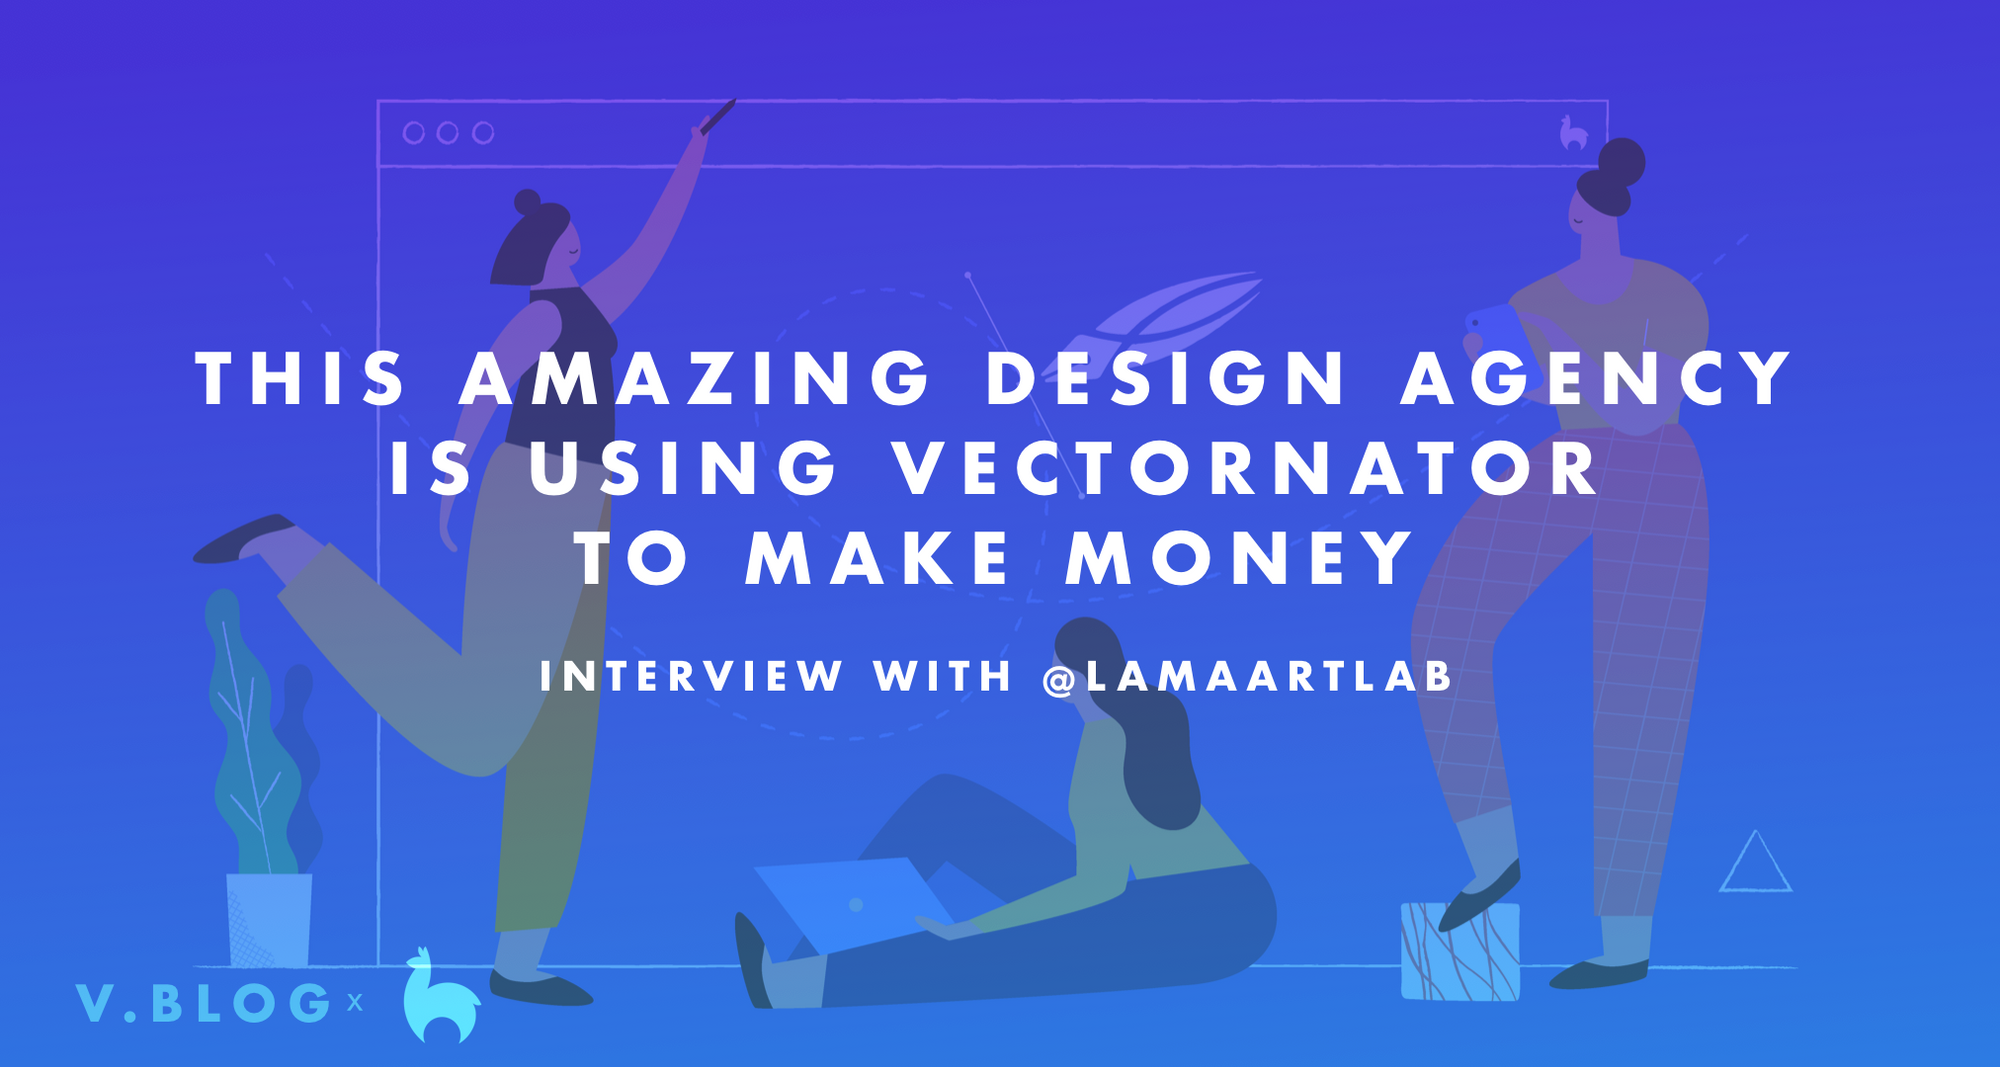 This Design Agency Is Using Vectornator To Make Money